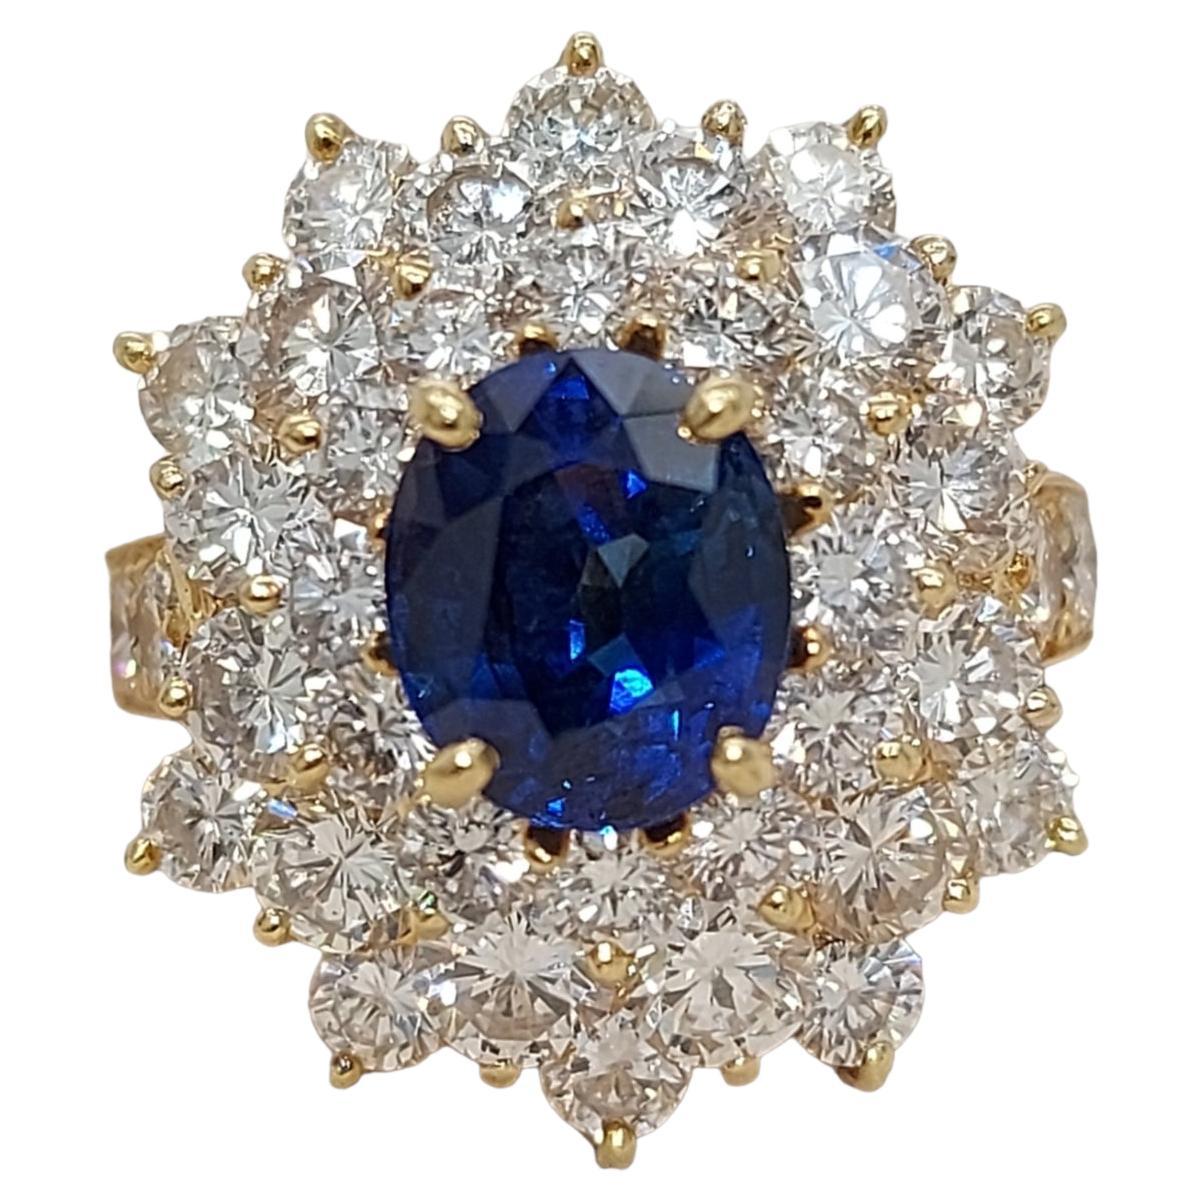 Magnificent 18 kt. Yellow Gold Ring With 2ct Sapphire and 2.8ct Diamonds , Estate His Majesty SUltan of Oman Qaboos Bin Said

Sapphire: Intense Blue, Oval shape, Madagascar sapphire 2 ct. Comes with Carat Gem Lab Certificate CGL28028

Diamonds: